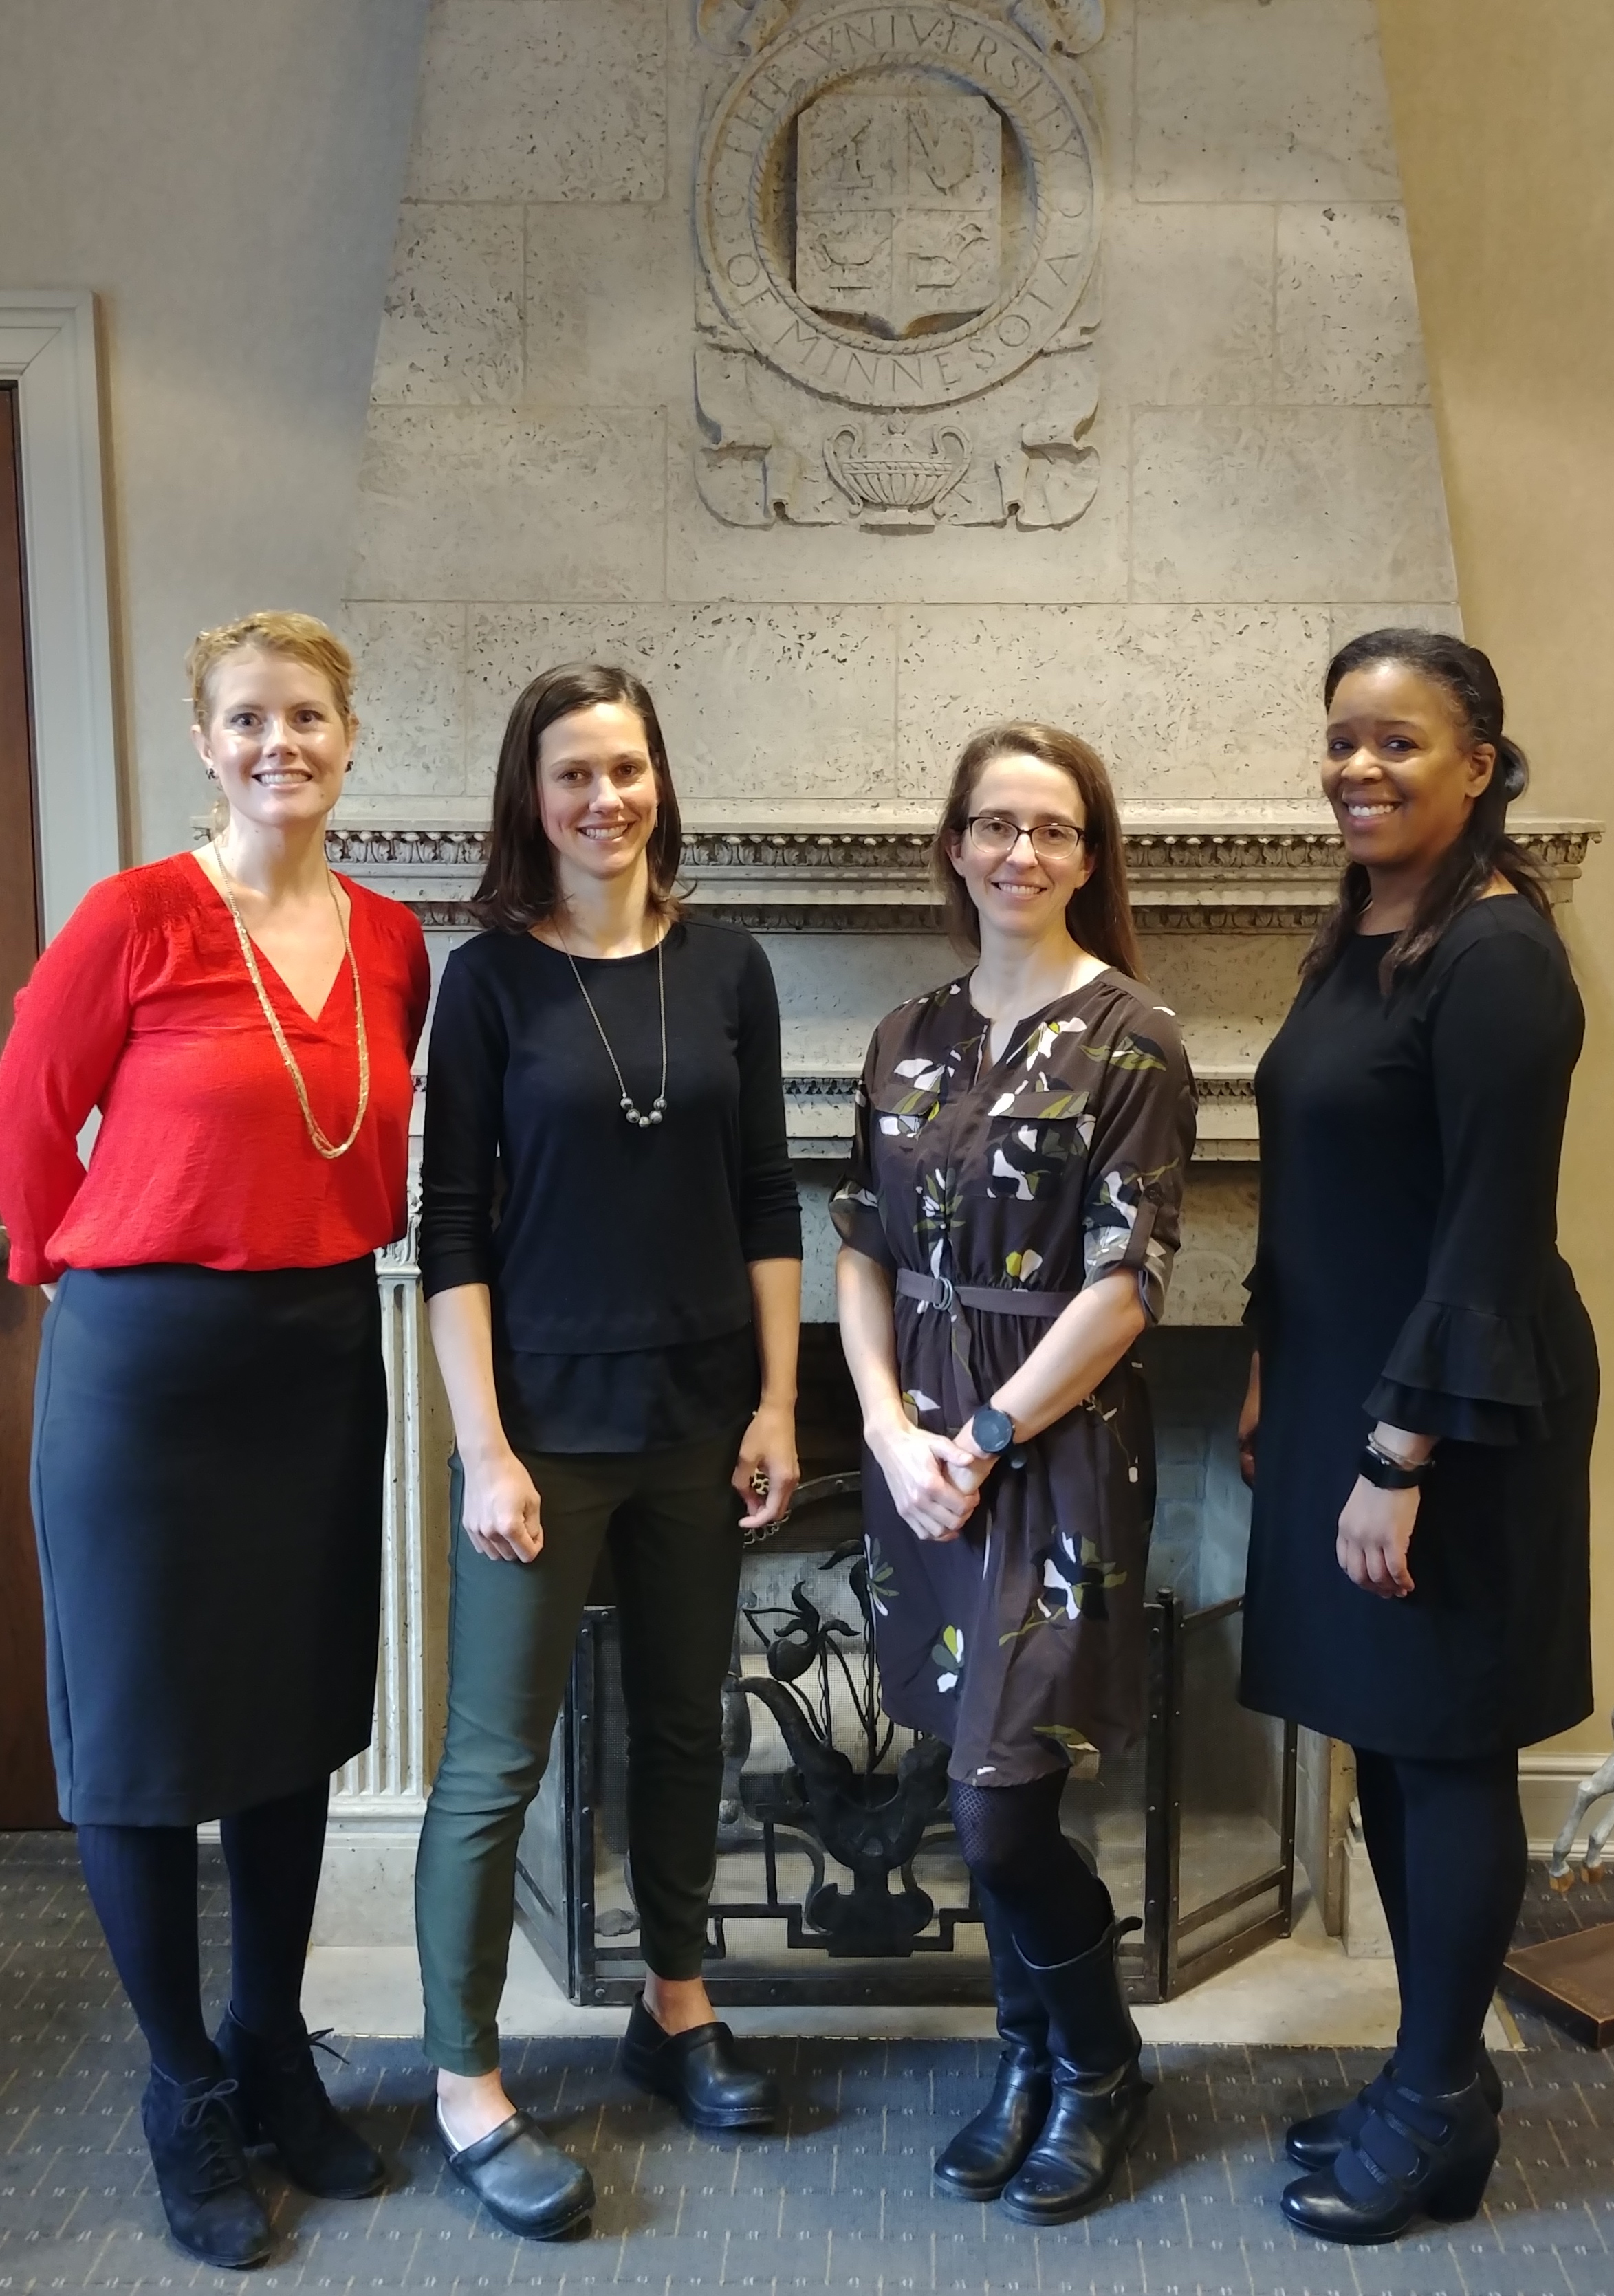 Lactation Advocacy Committee members Sara Benning, Mikaela Robertson, Sarah Keene and Equity, Access and Diversity Committee chair Keisha Varma pose in front of a fireplace topped with the U of MN seal.